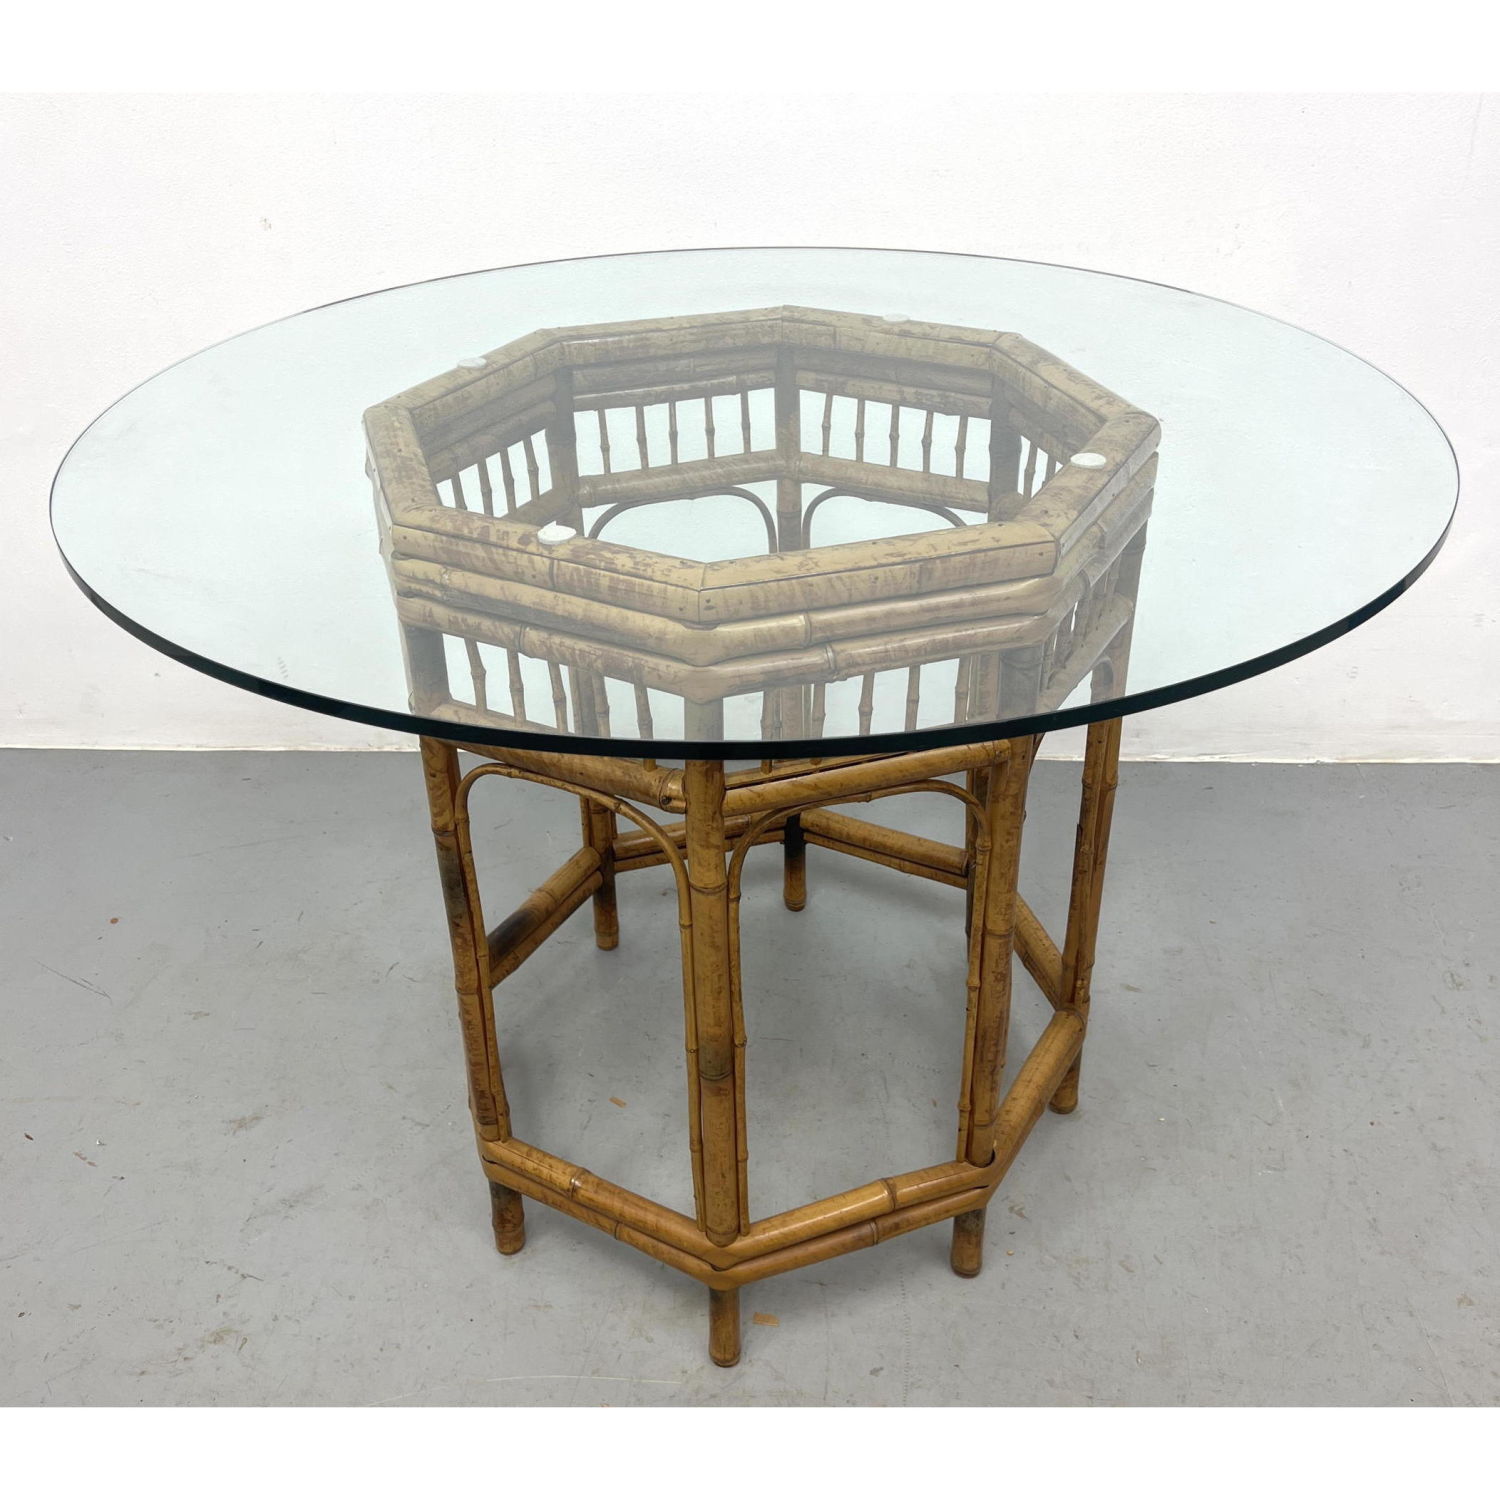 McGUIRE Style Bamboo Dining Table